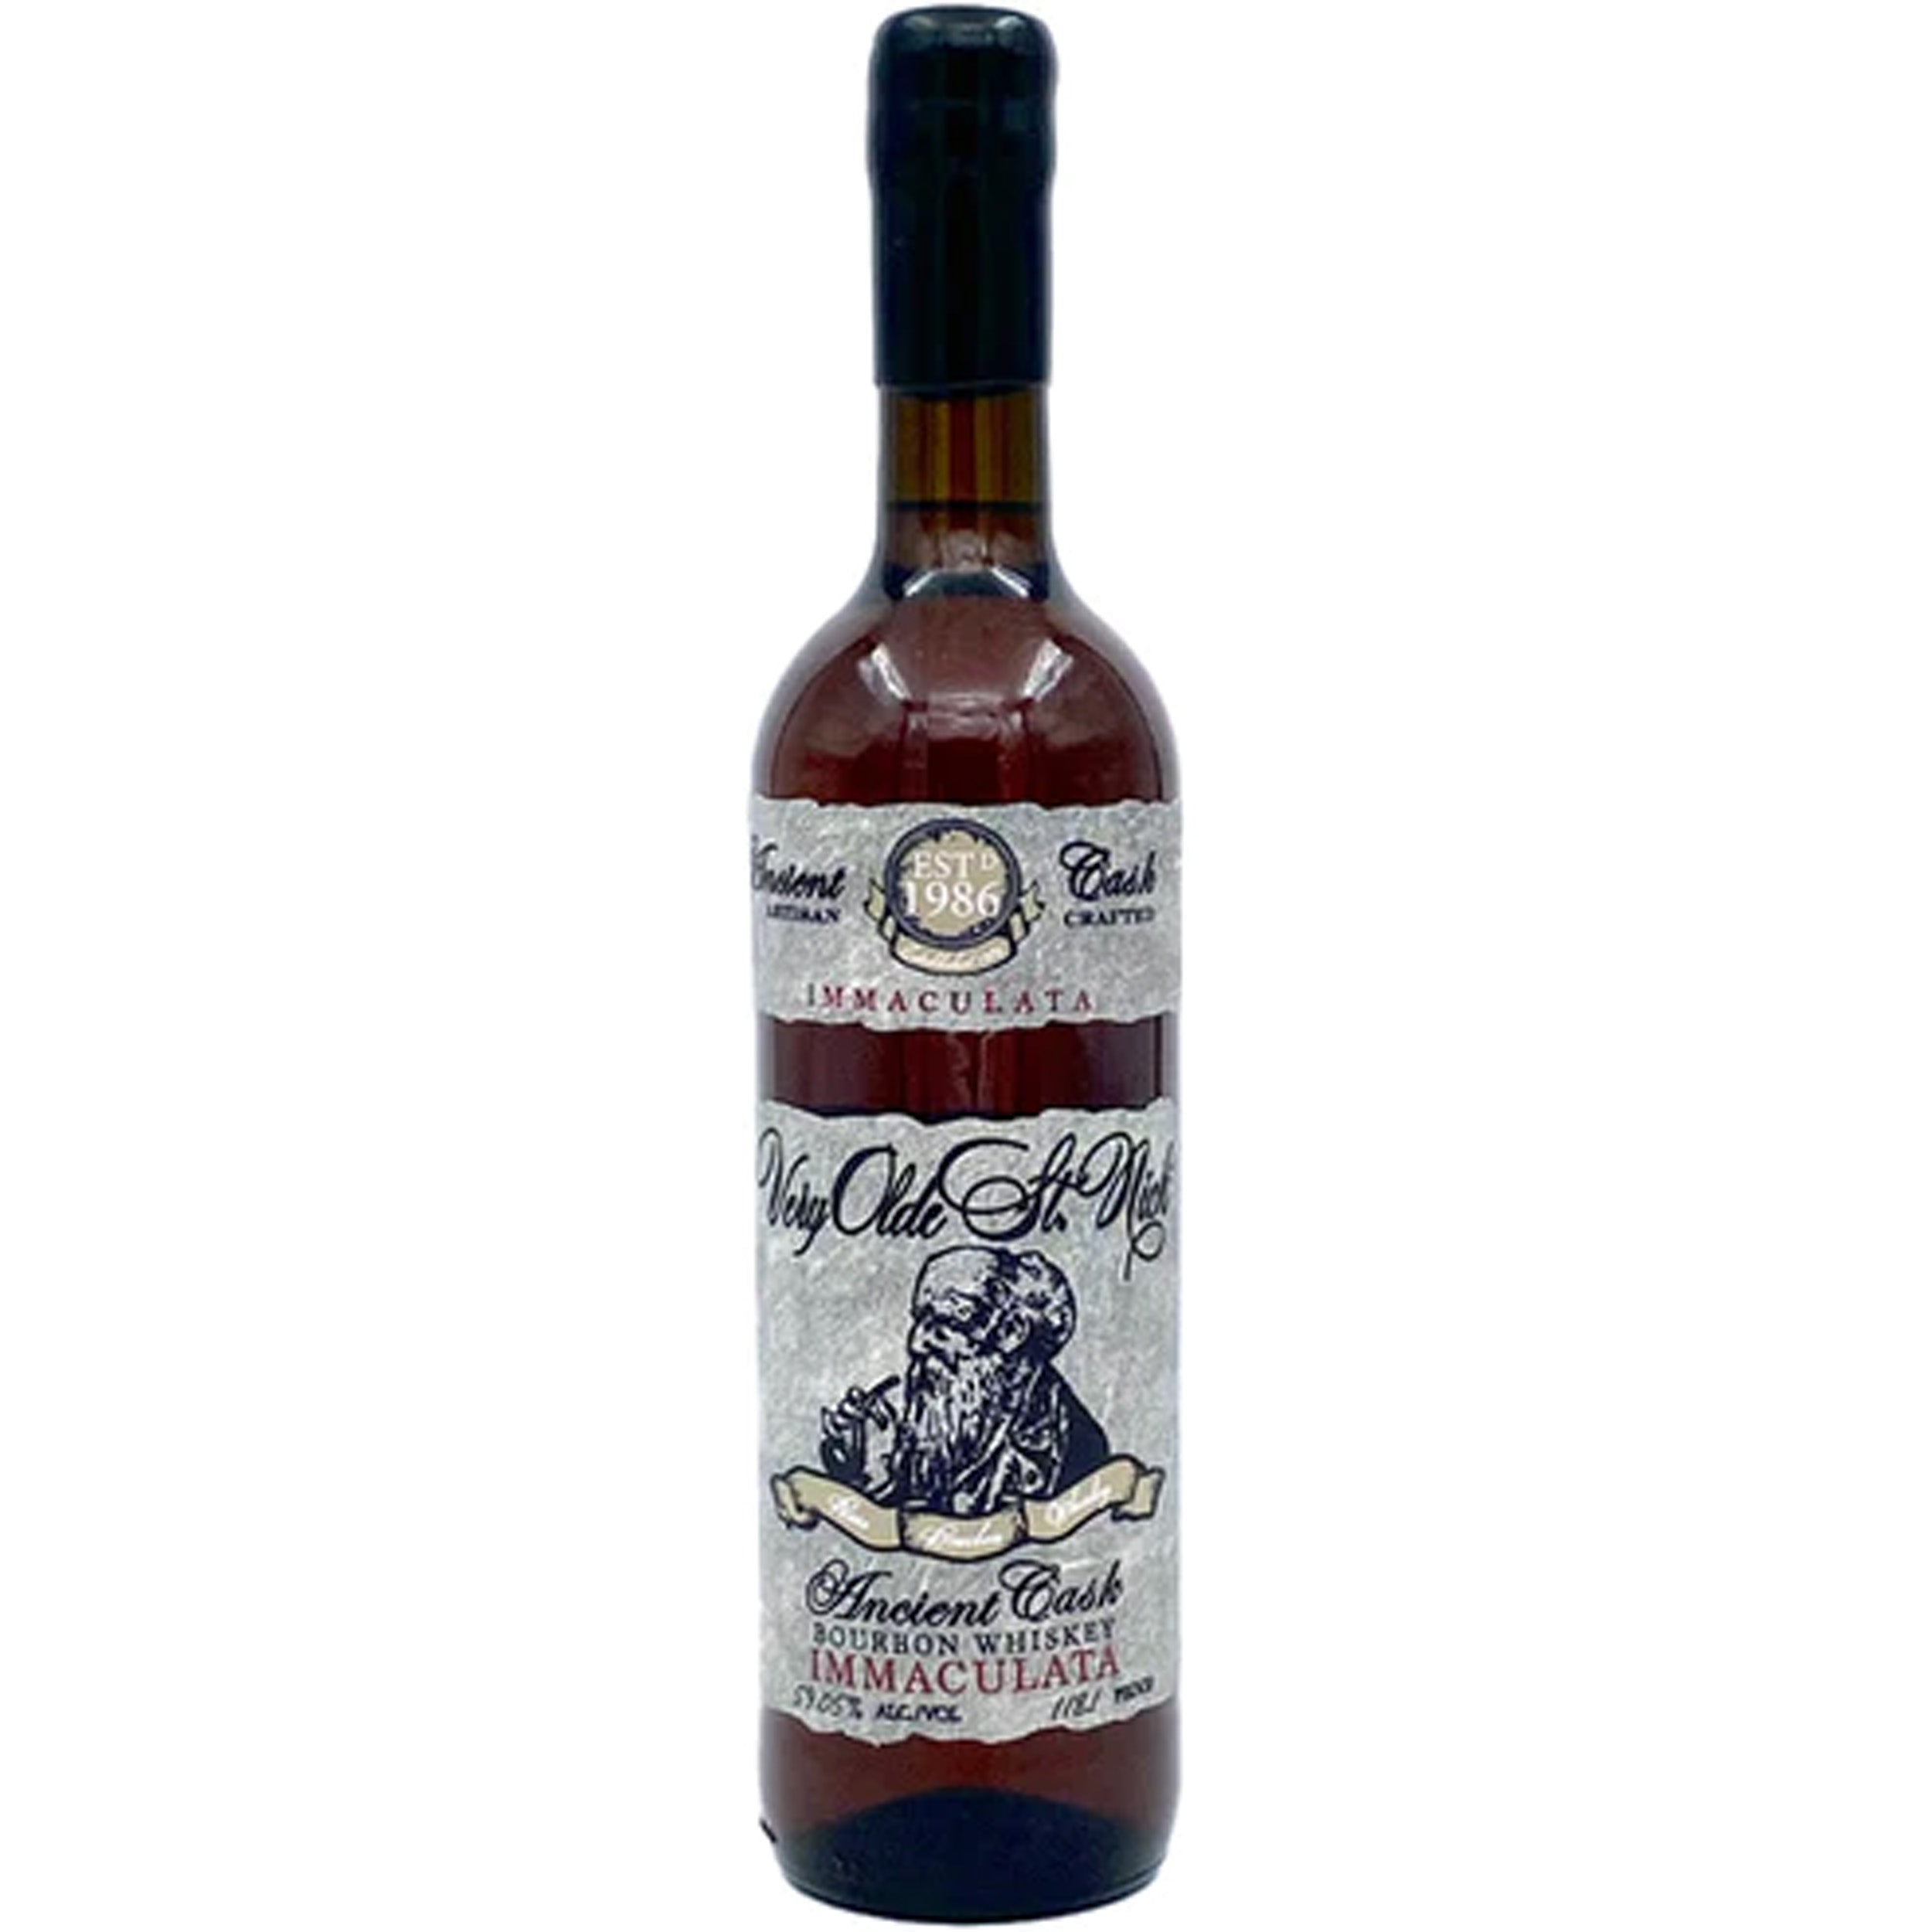 Very Olde St. Nick 'Immaculata' Ancient Cask Bourbon Whiskey